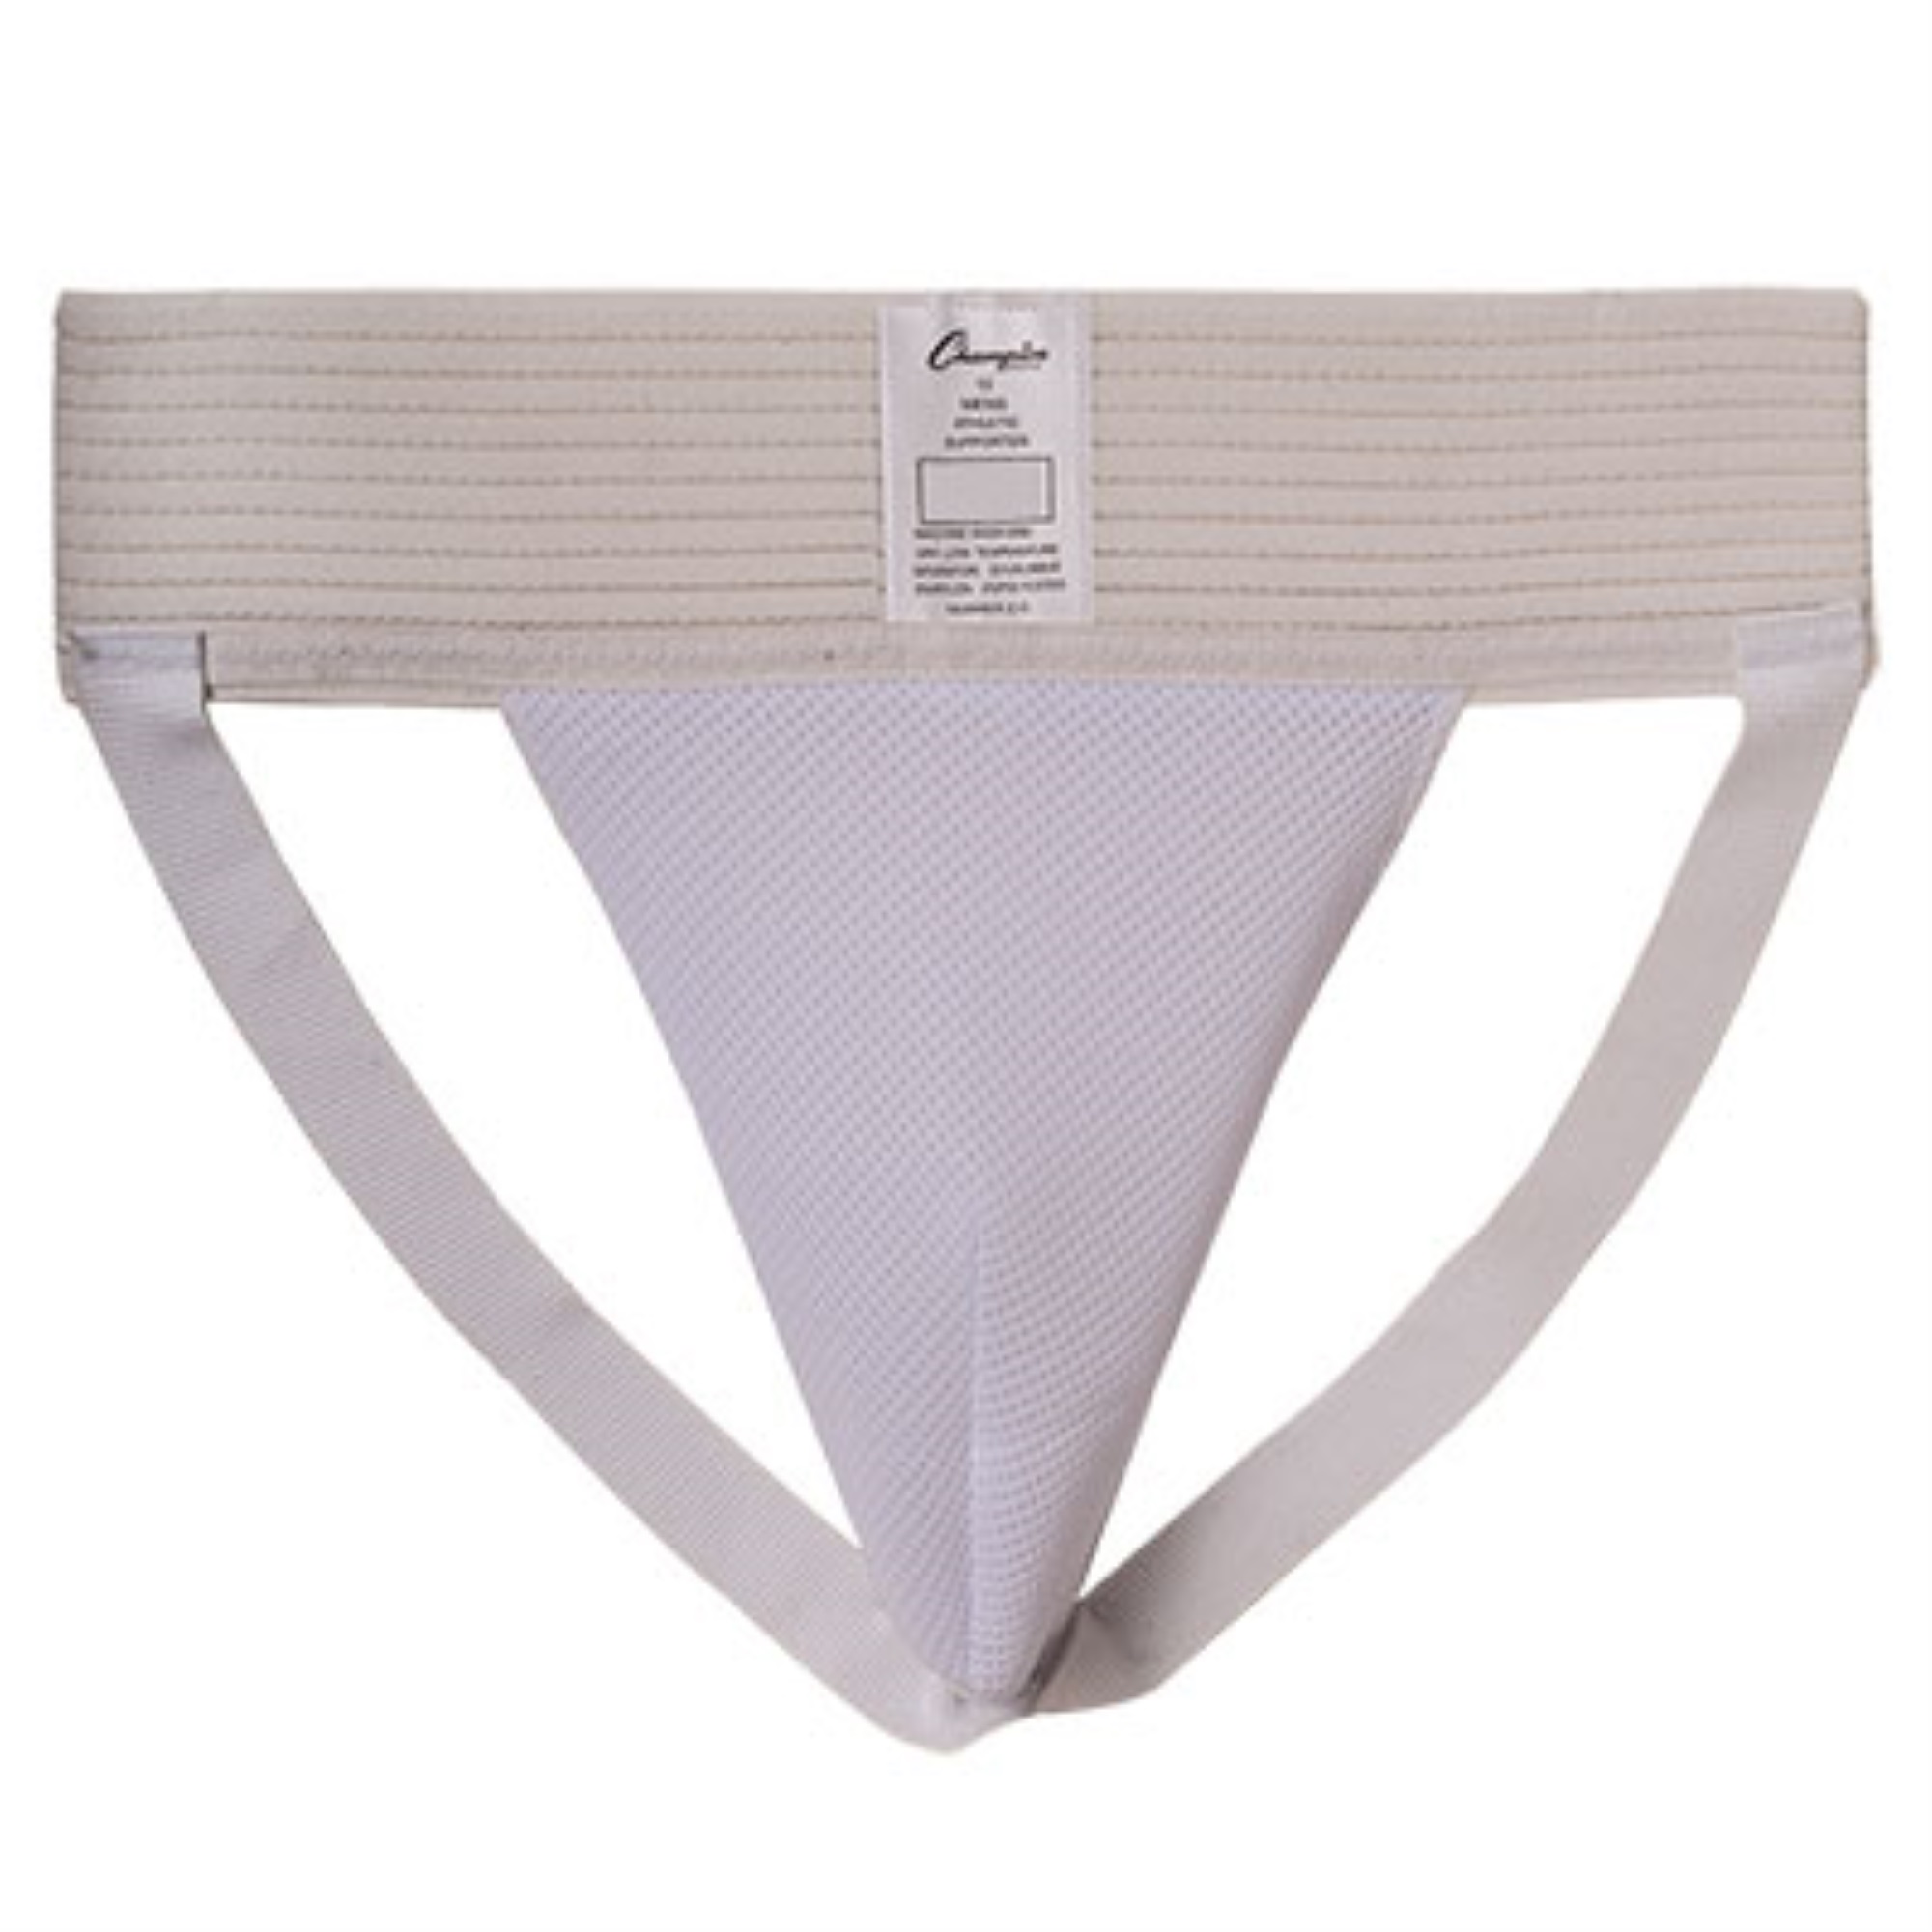 Champion Sports Men's Athletic Supporter Extra Large